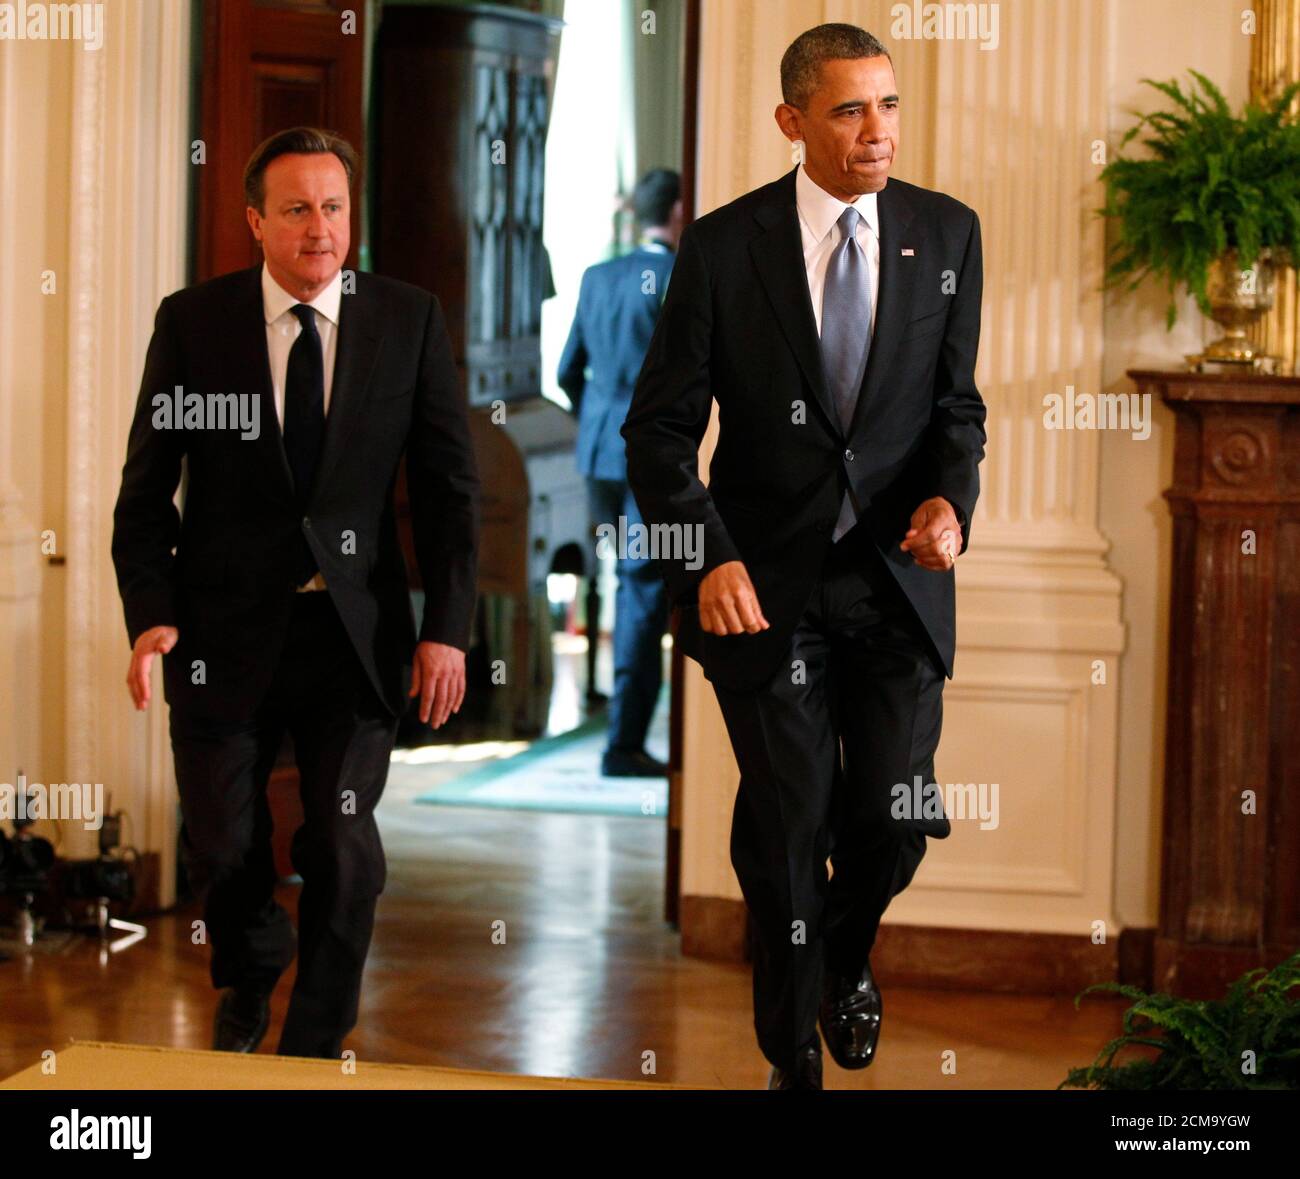 Britain's Prime Minister David Cameron and U.S. President Barack Obama arrive at a joint news conference in the East Room of the White House in Washington, May 13, 2013. REUTERS/Jim Bourg (UNITED STATES - Tags: POLITICS) Stock Photo